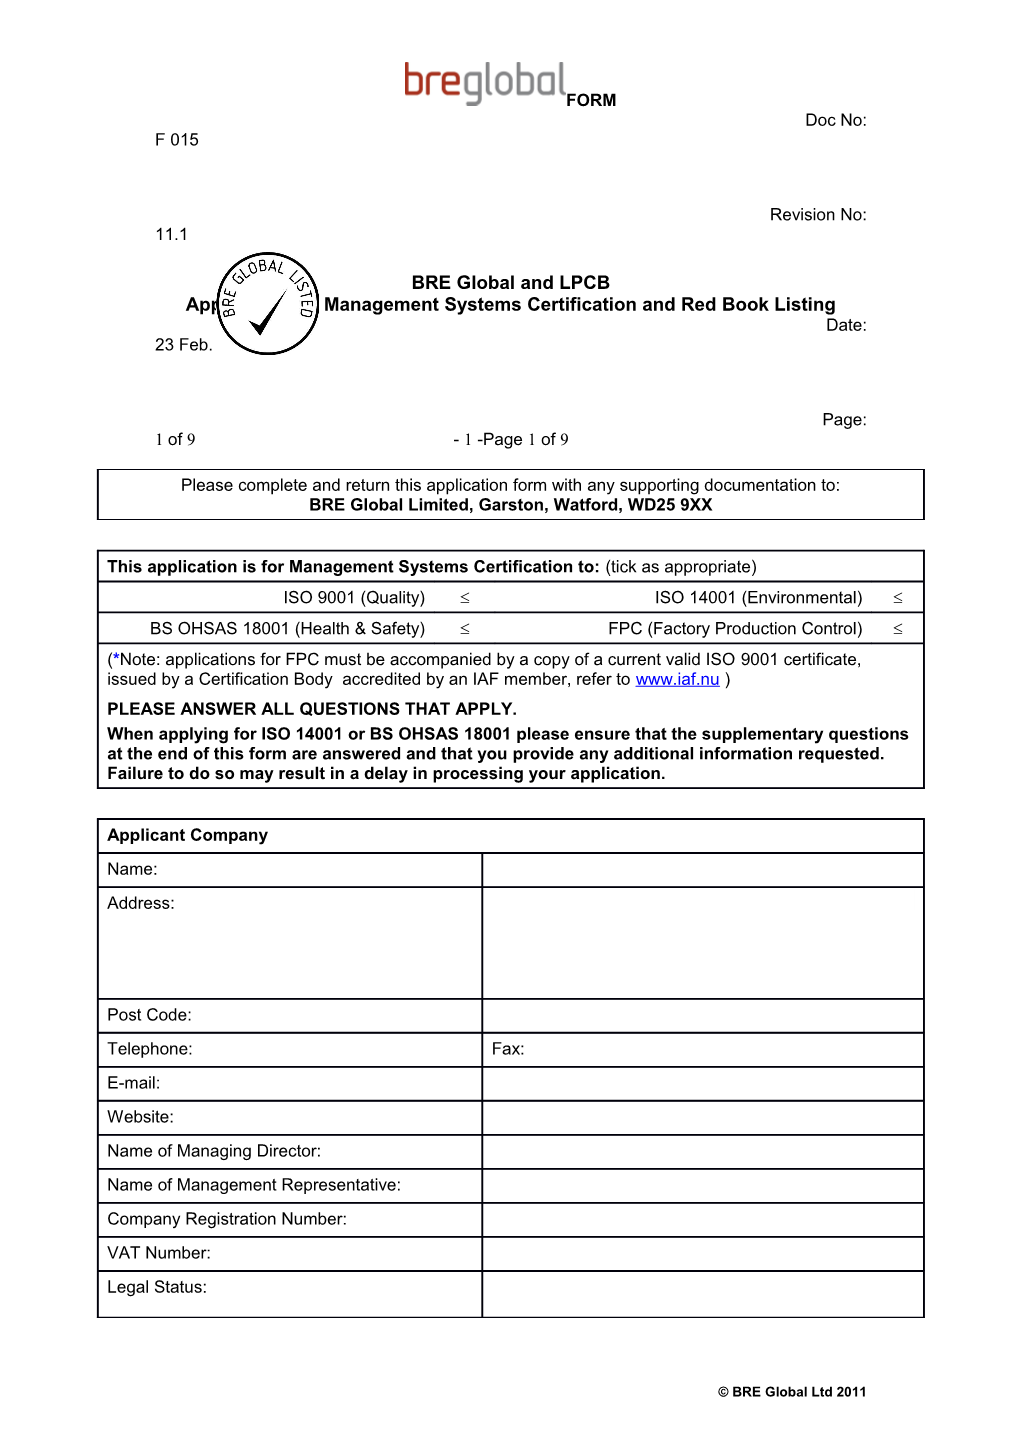 Please Complete and Return This Application Form with Any Supporting Documentation To